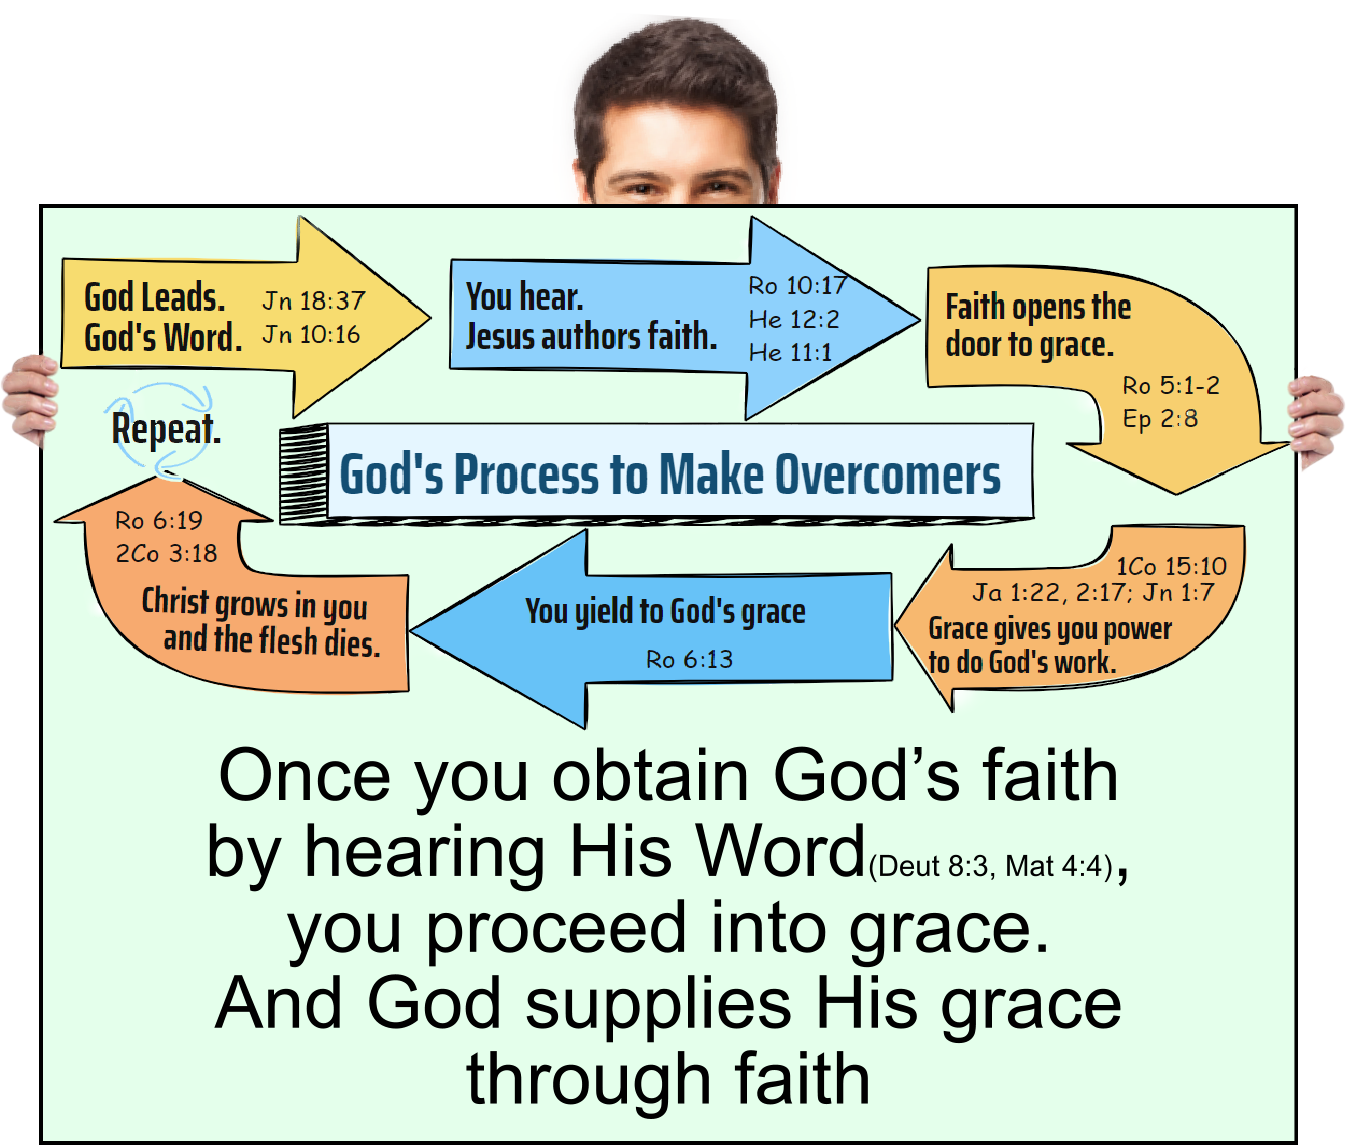 Once you obtain God’s faith by hearing His Word, you proceed into grace. And God supplies His grace through faith